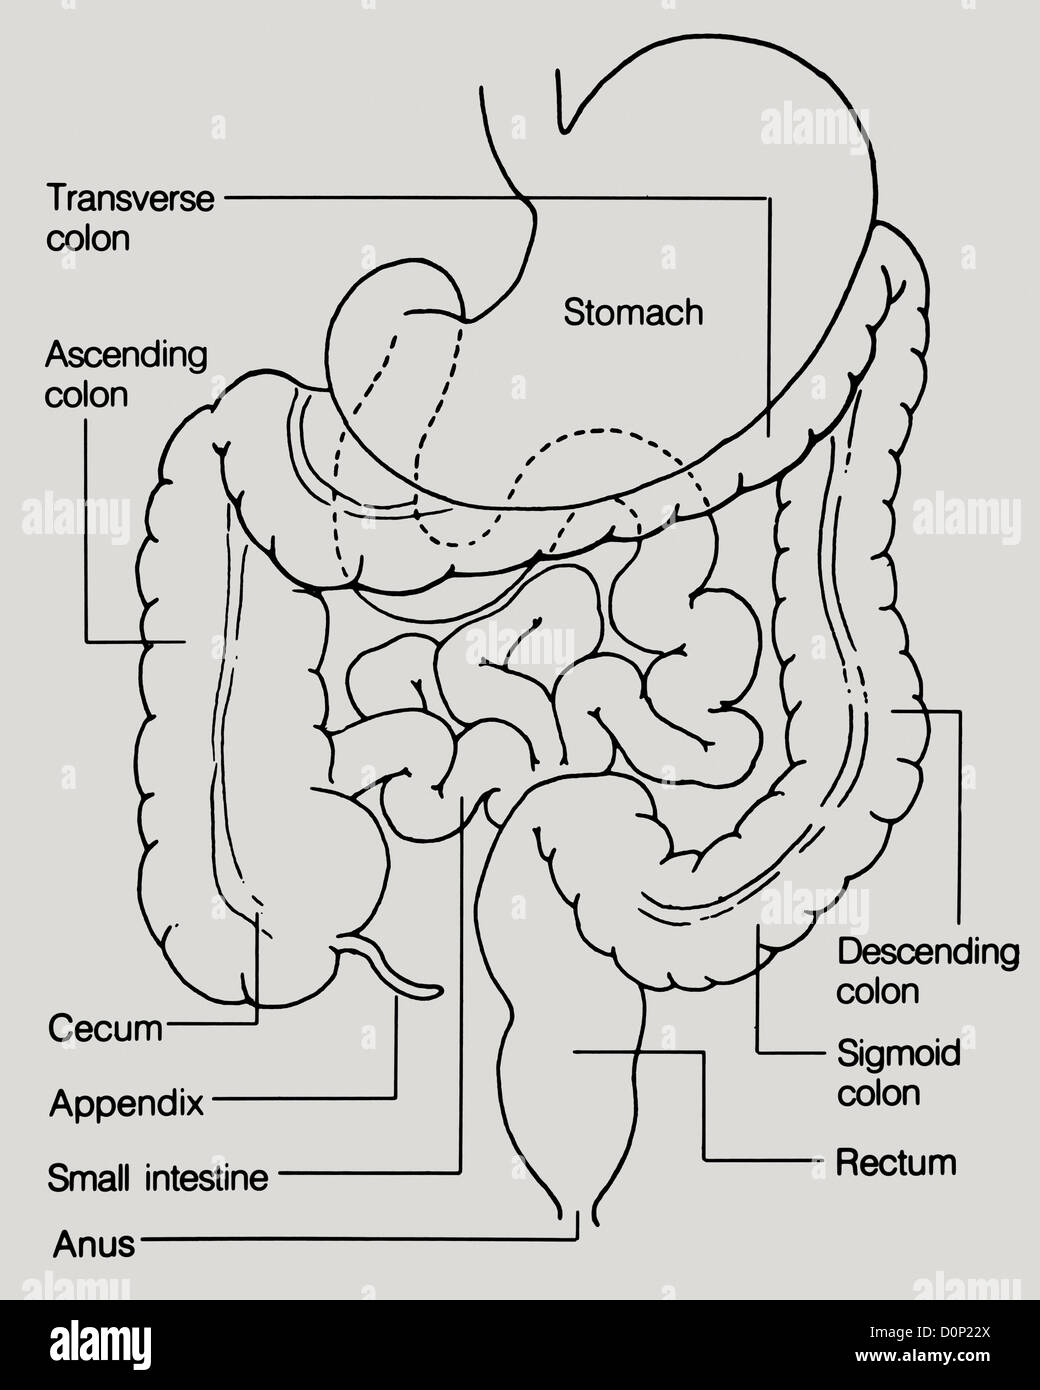 A line drawing showing the colon, rectum, stomach, cecum, appendix, small intestine, and anus. Stock Photo